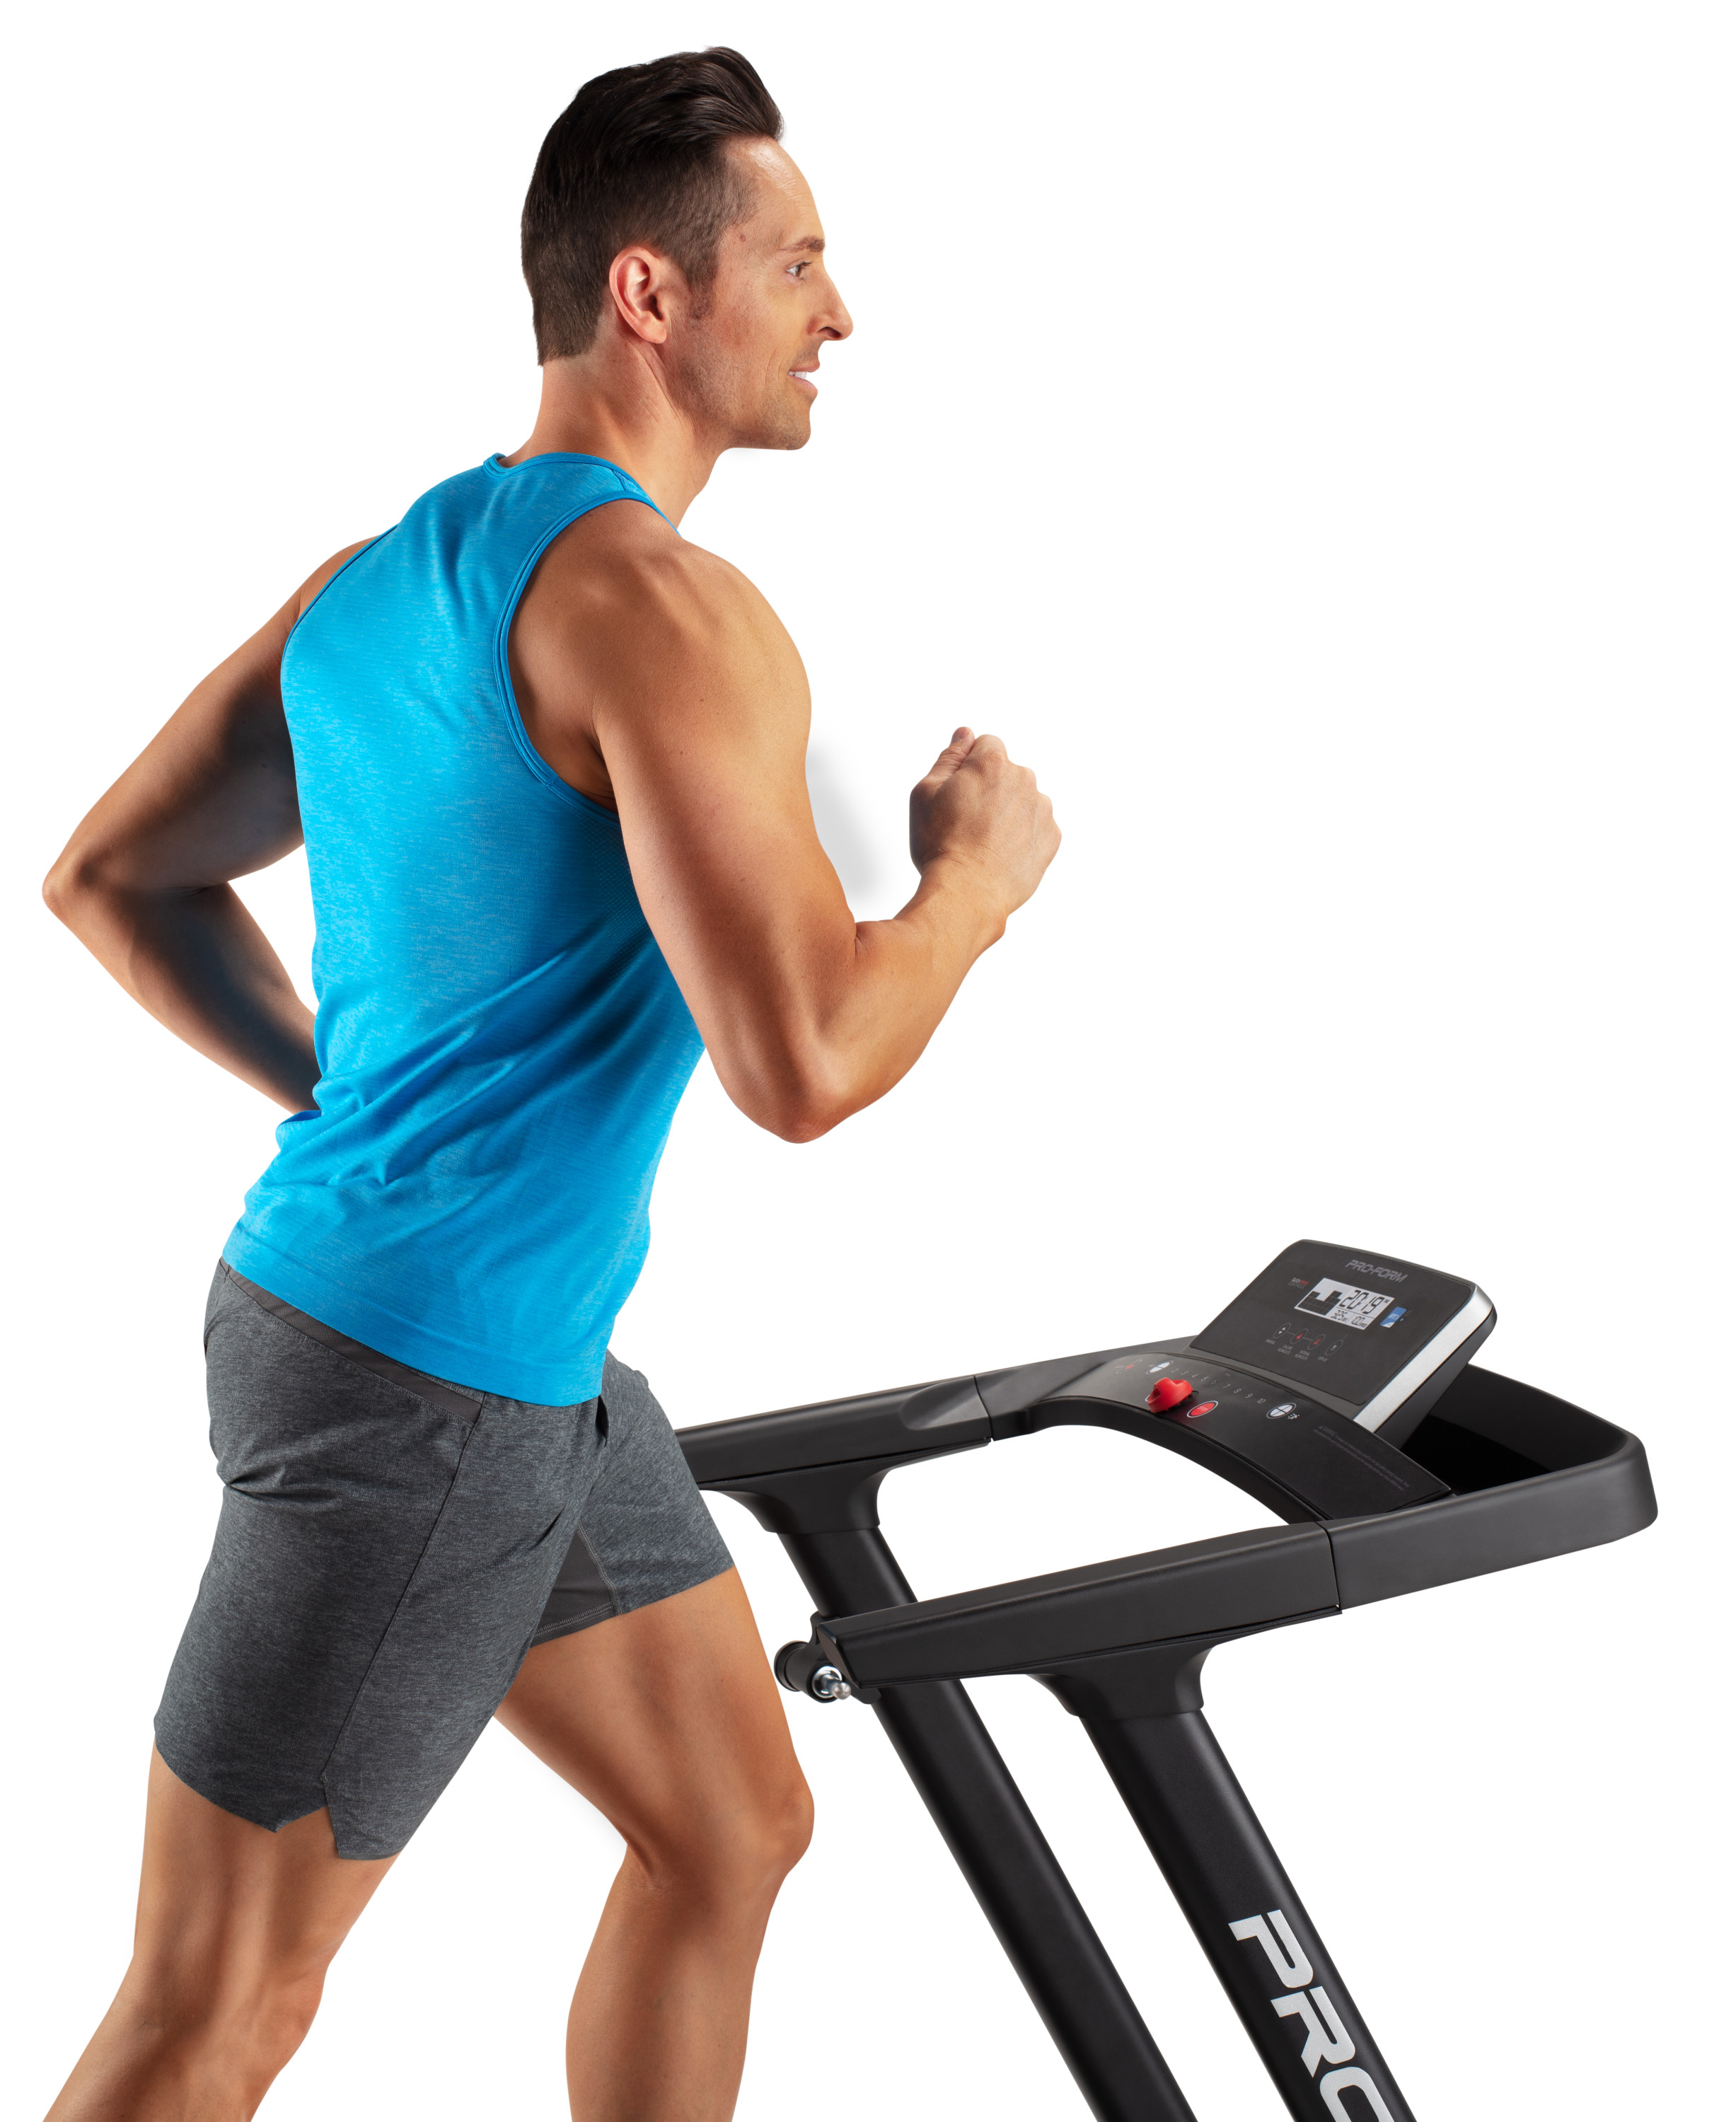 ProForm Cadence WLT Folding Treadmill with Reflex Deck for Walking and Jogging, iFit Bluetooth Enabled - image 23 of 31